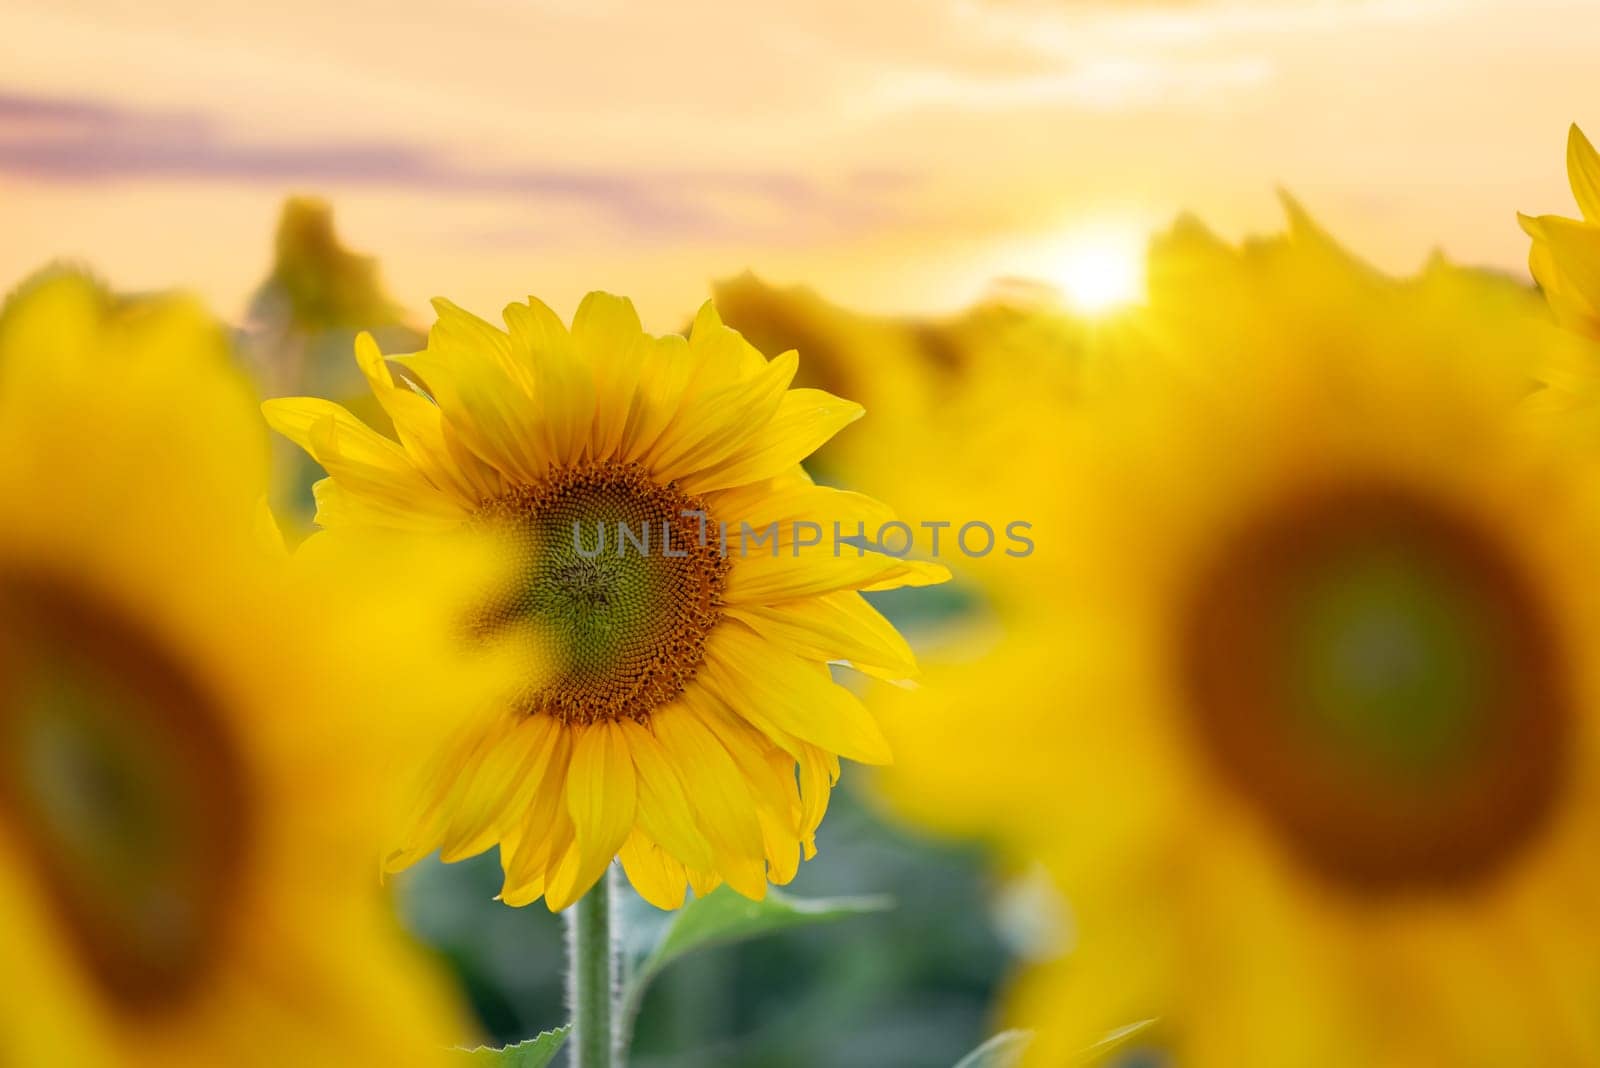 Yellow and orange colours, warm joyful atmosphere, close up of sunflowers, selective focus